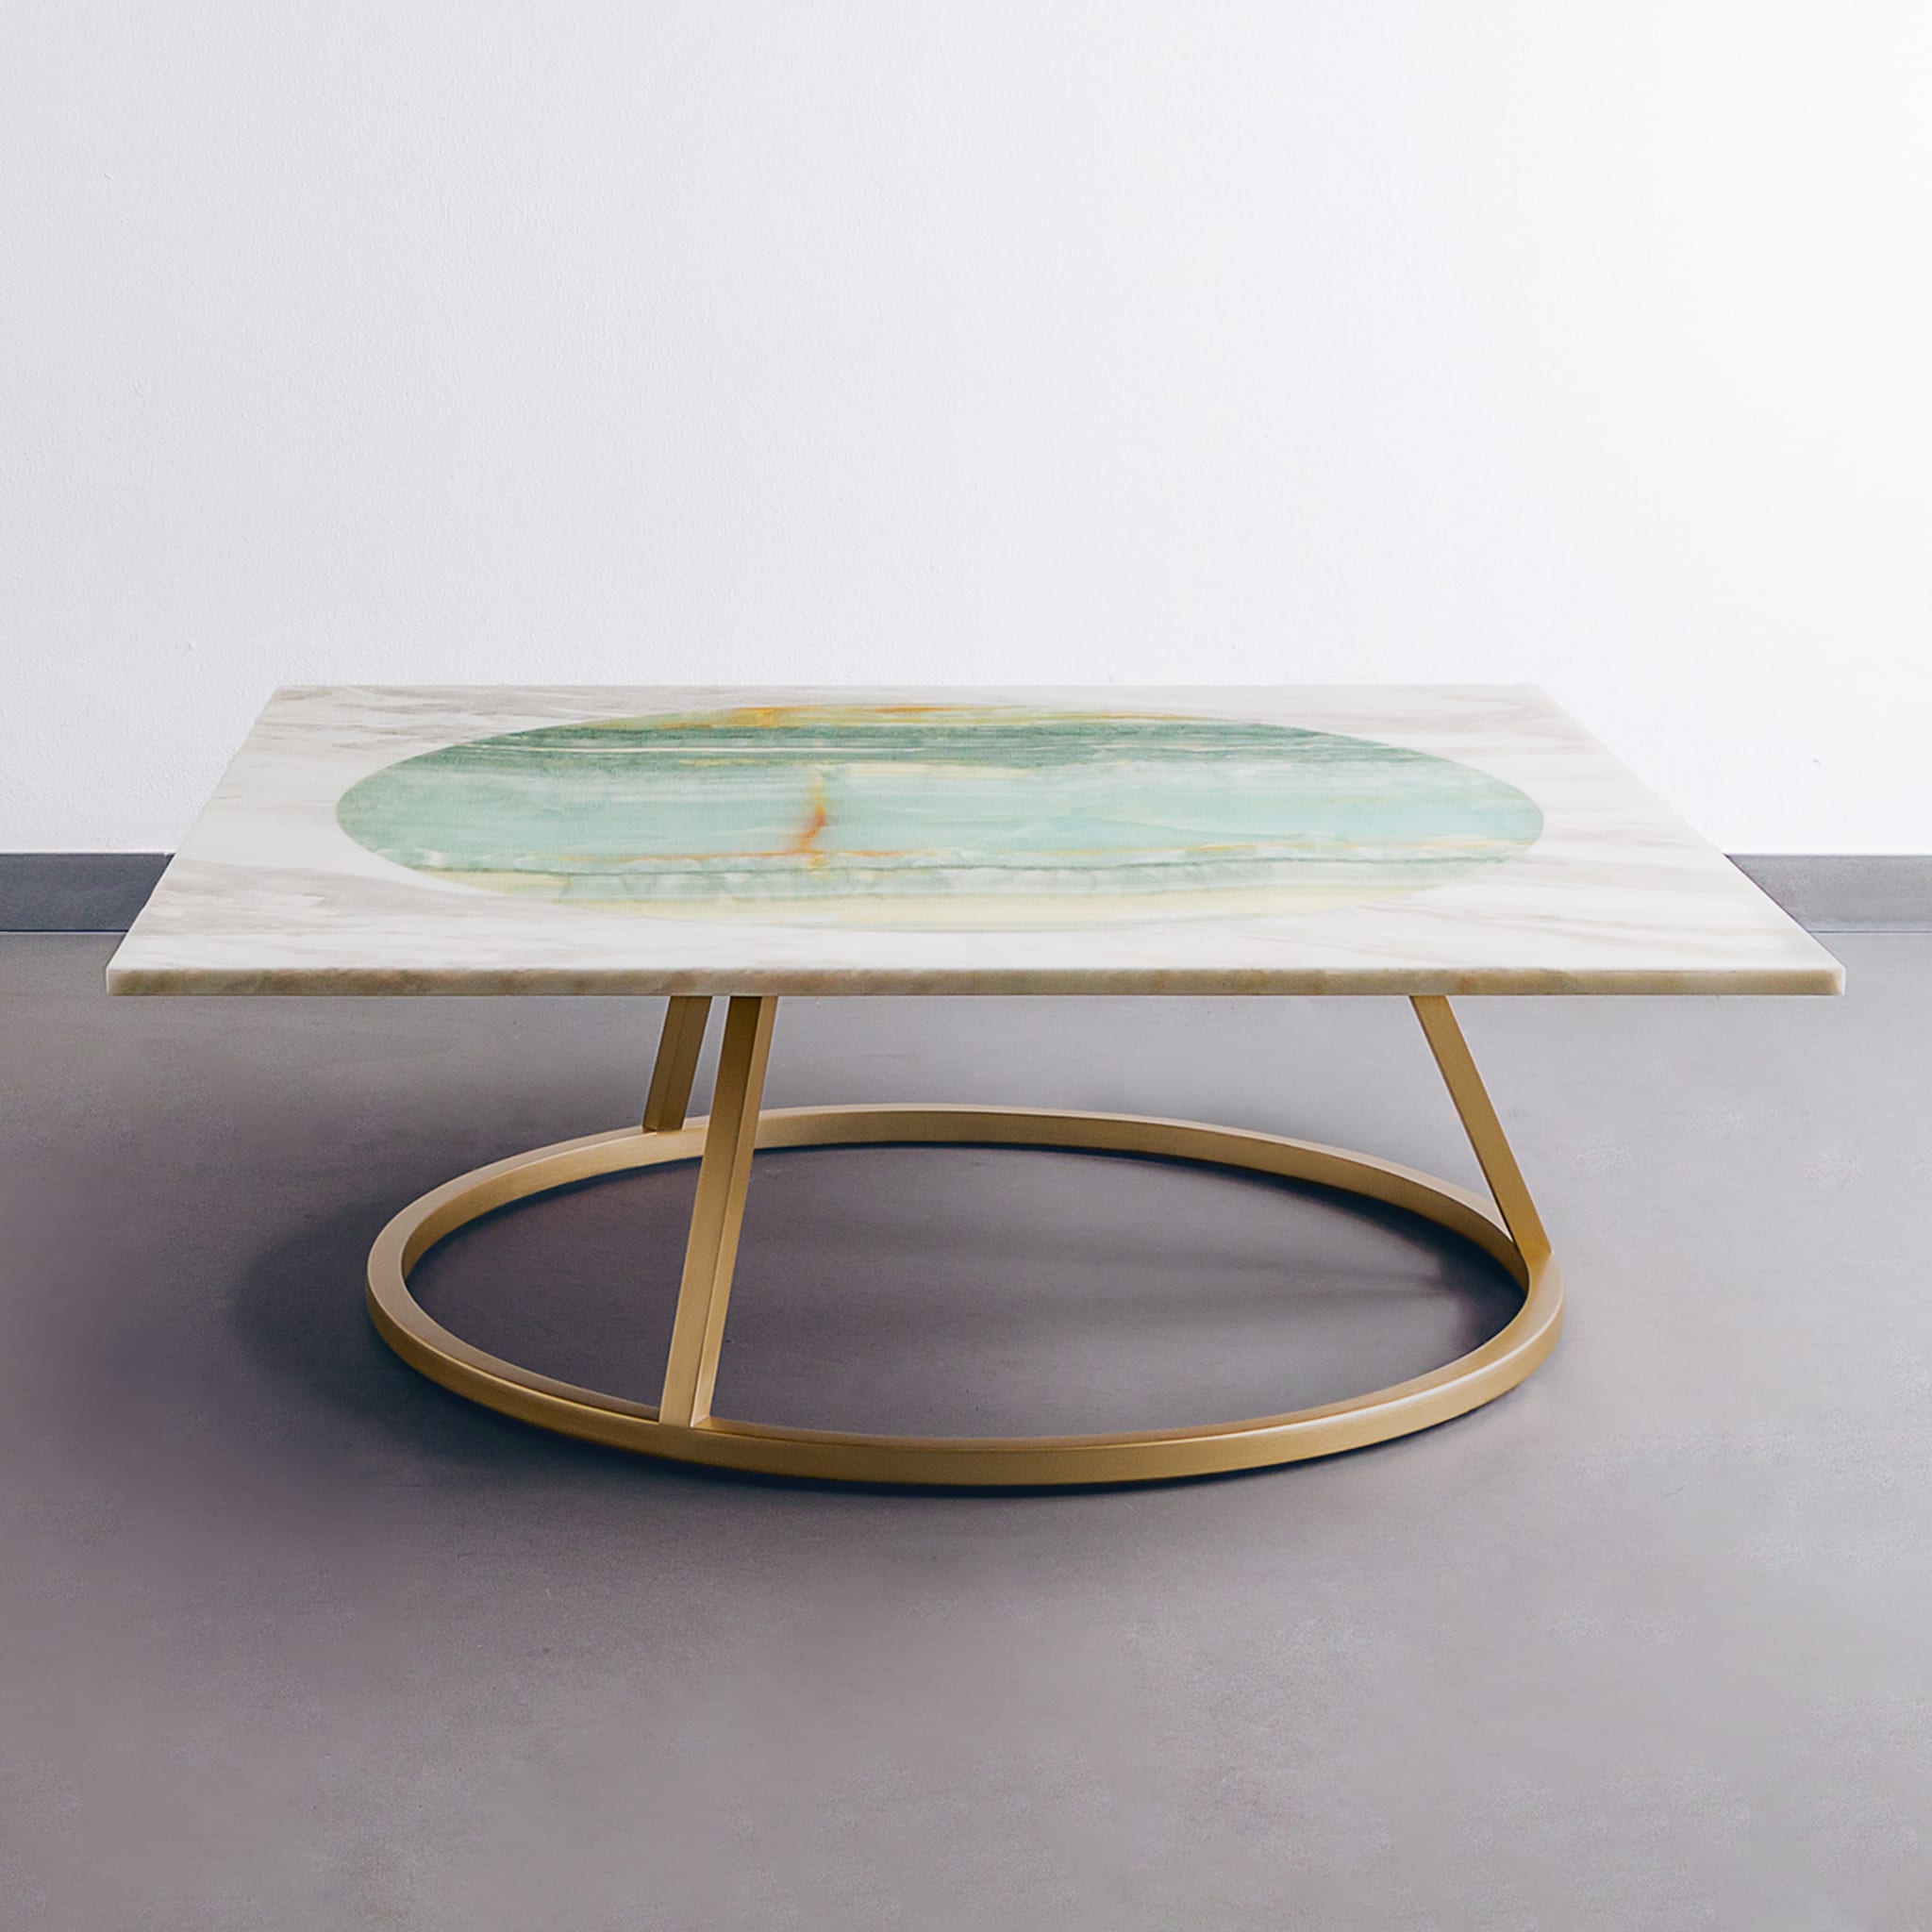 Pantheon Square Polychrome Coffee Table by Maarten De Ceulaer - Alternative view 4